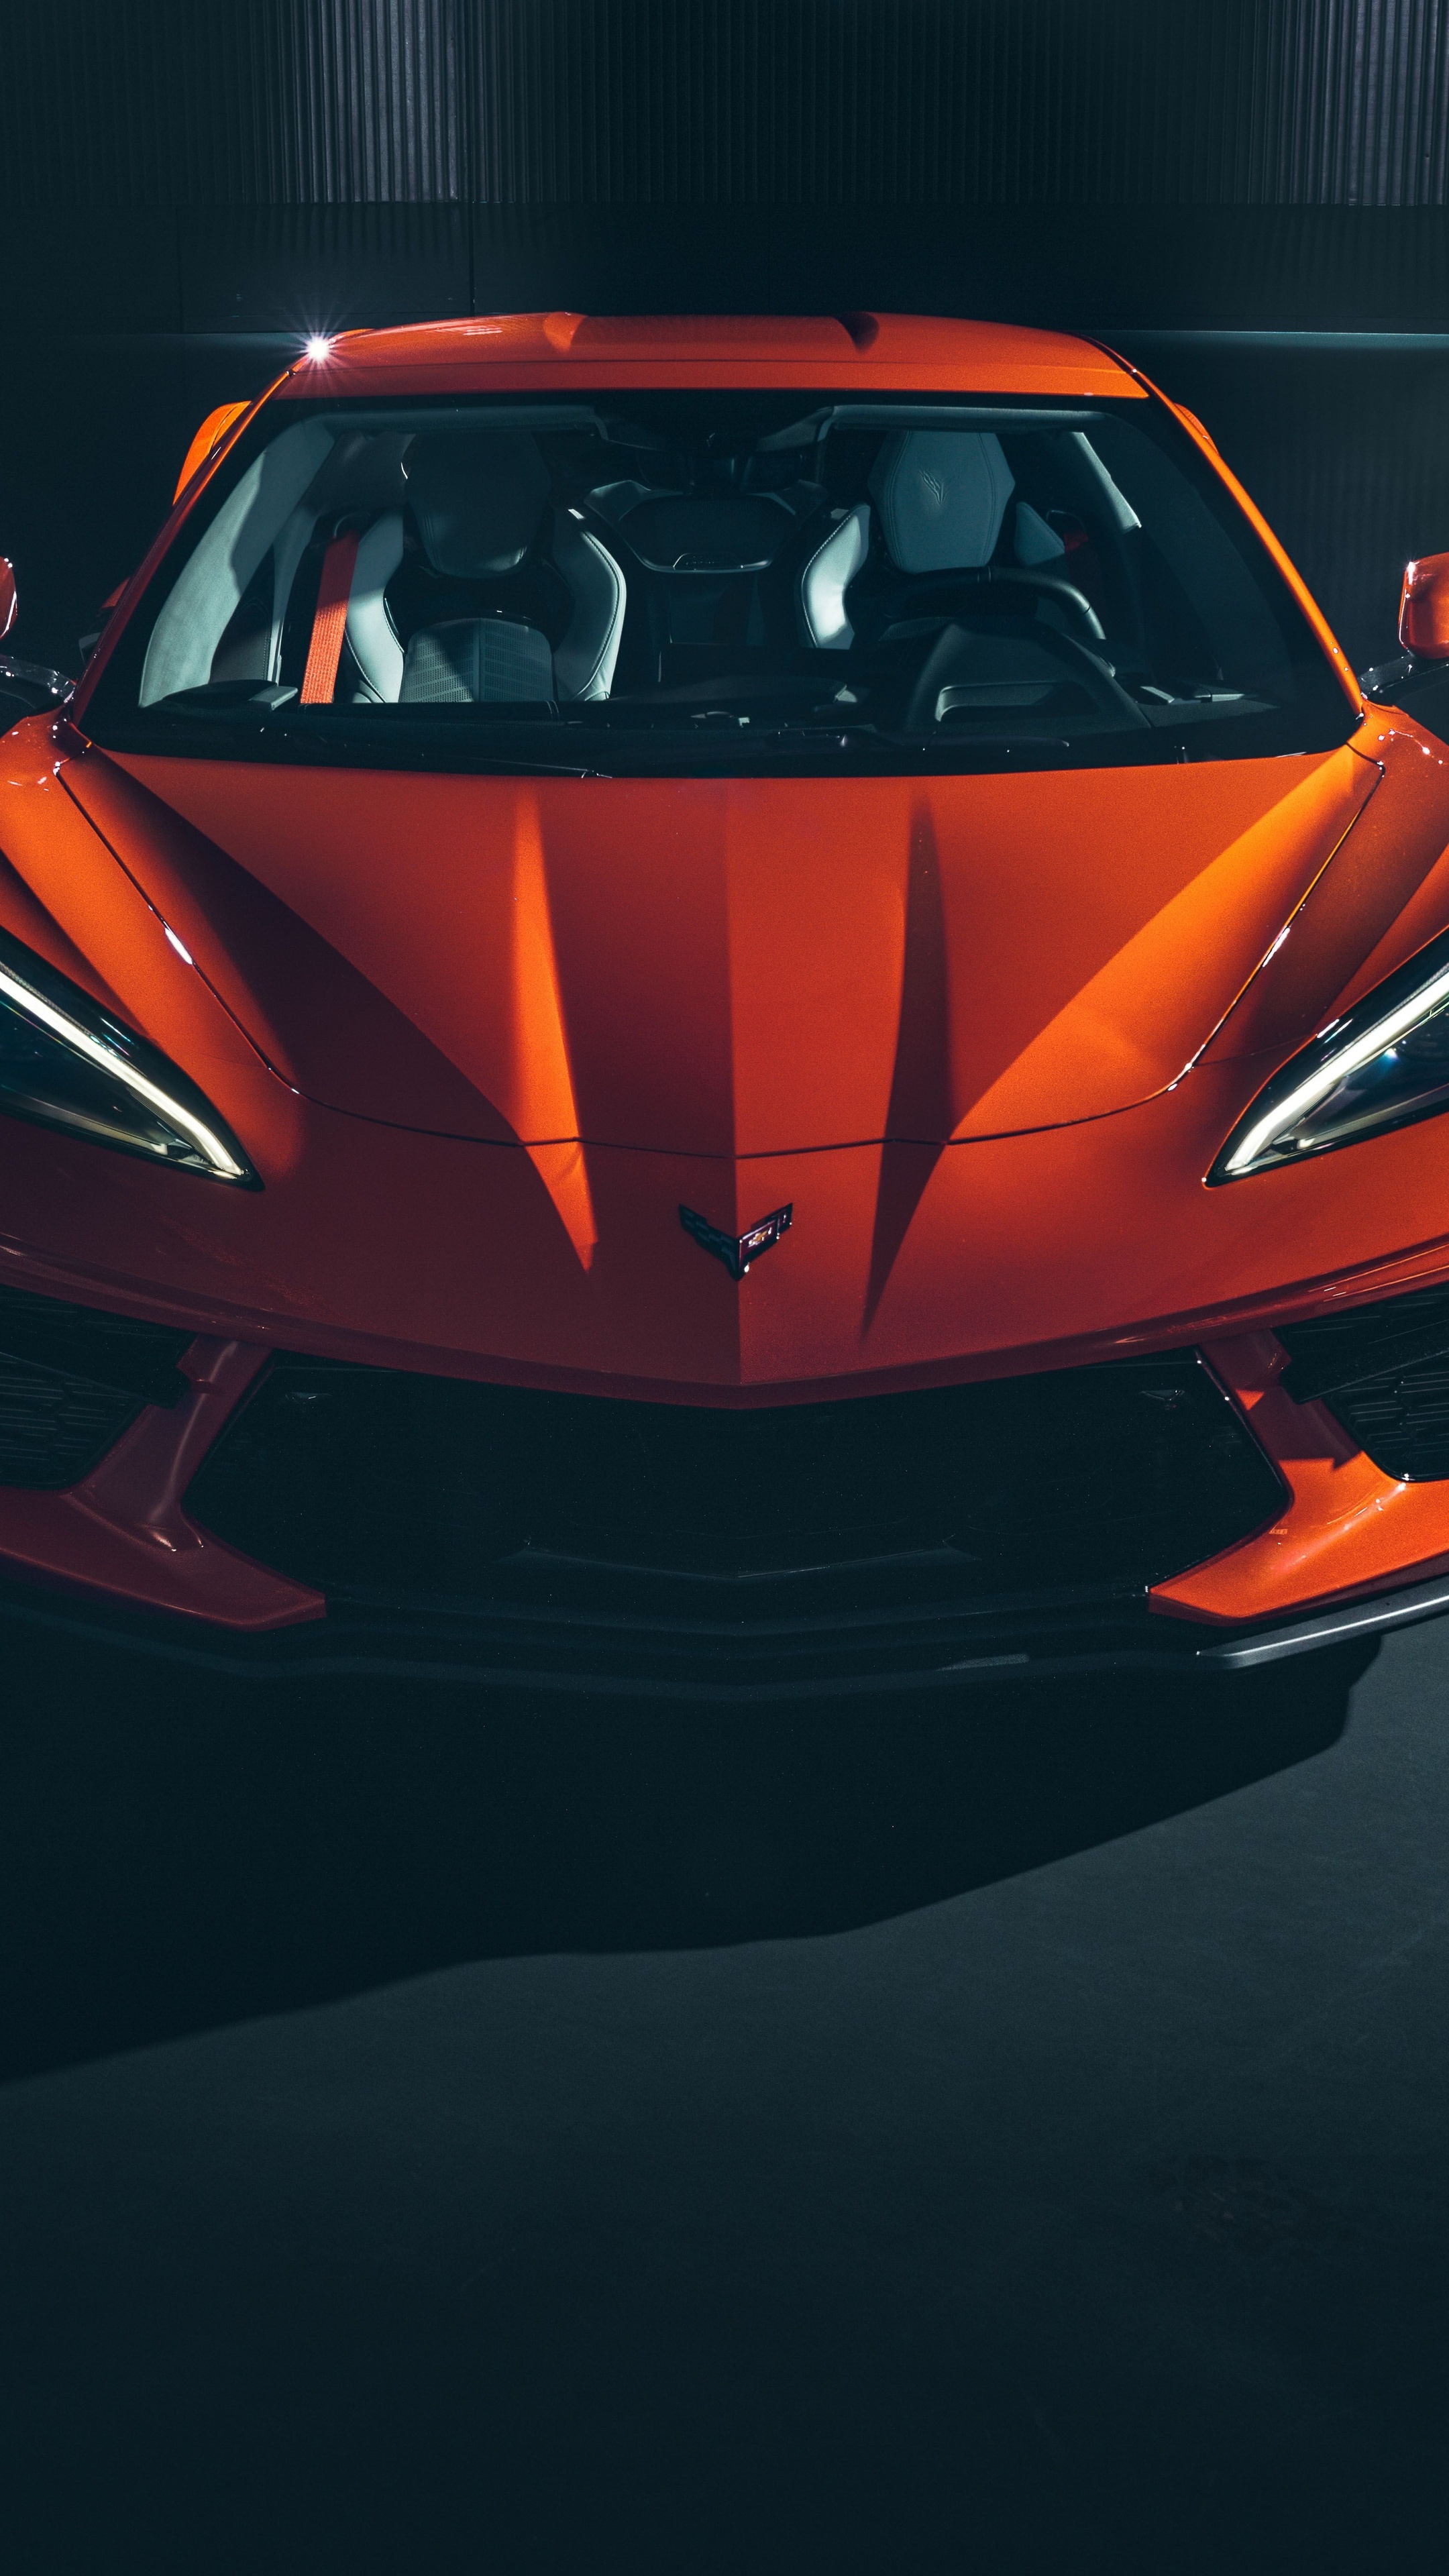 Corvette: Chevy Stingray C8, Z51 Performance package, Two-seater high-performance car. 2160x3840 4K Background.